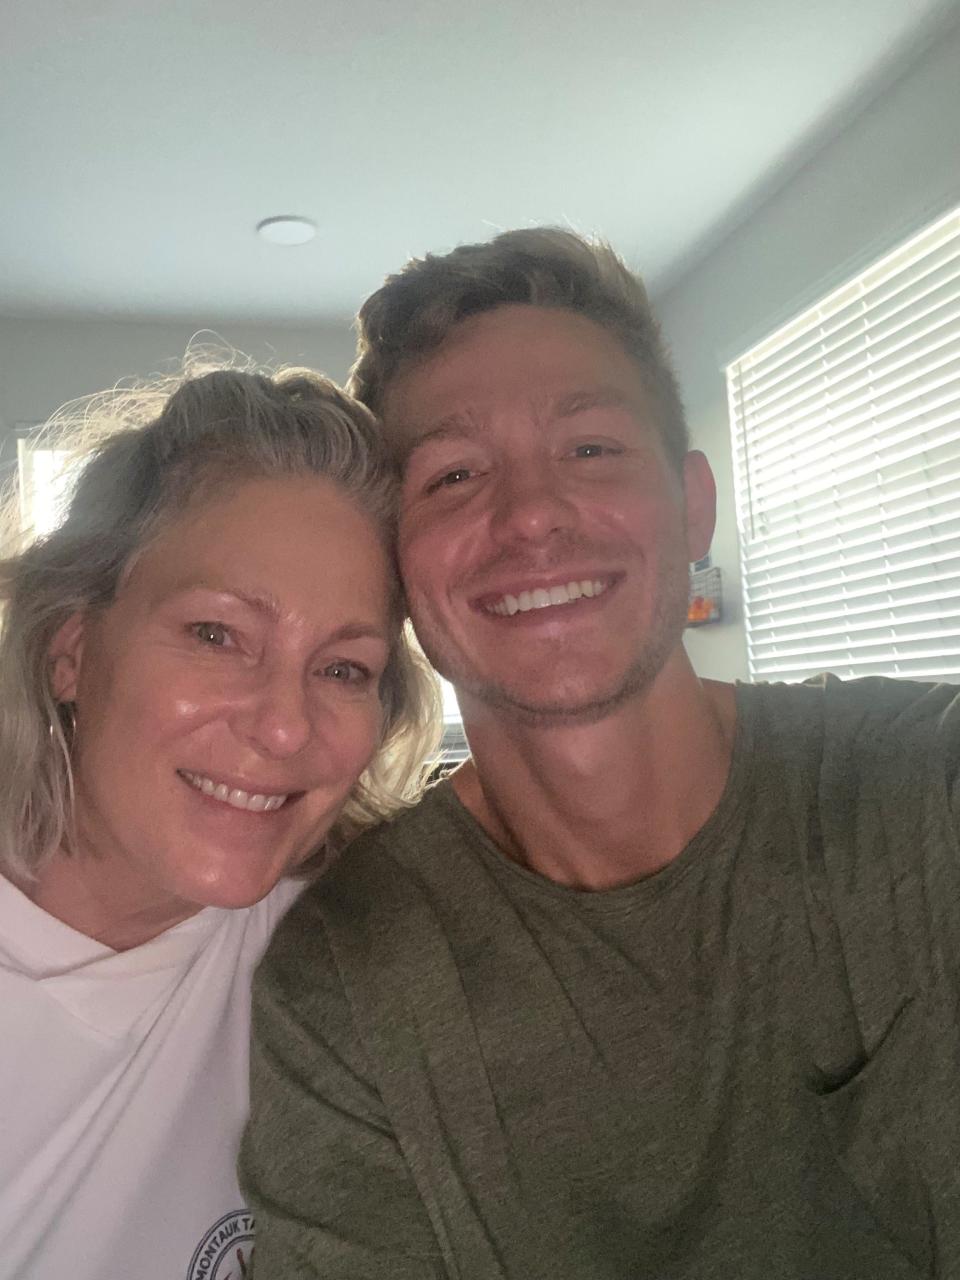 Joseph Clyde Bollick Havrilla with his mother, Stacey Morris, who reported him missing to the Riviera Beach Police weeks after this photo was taken.